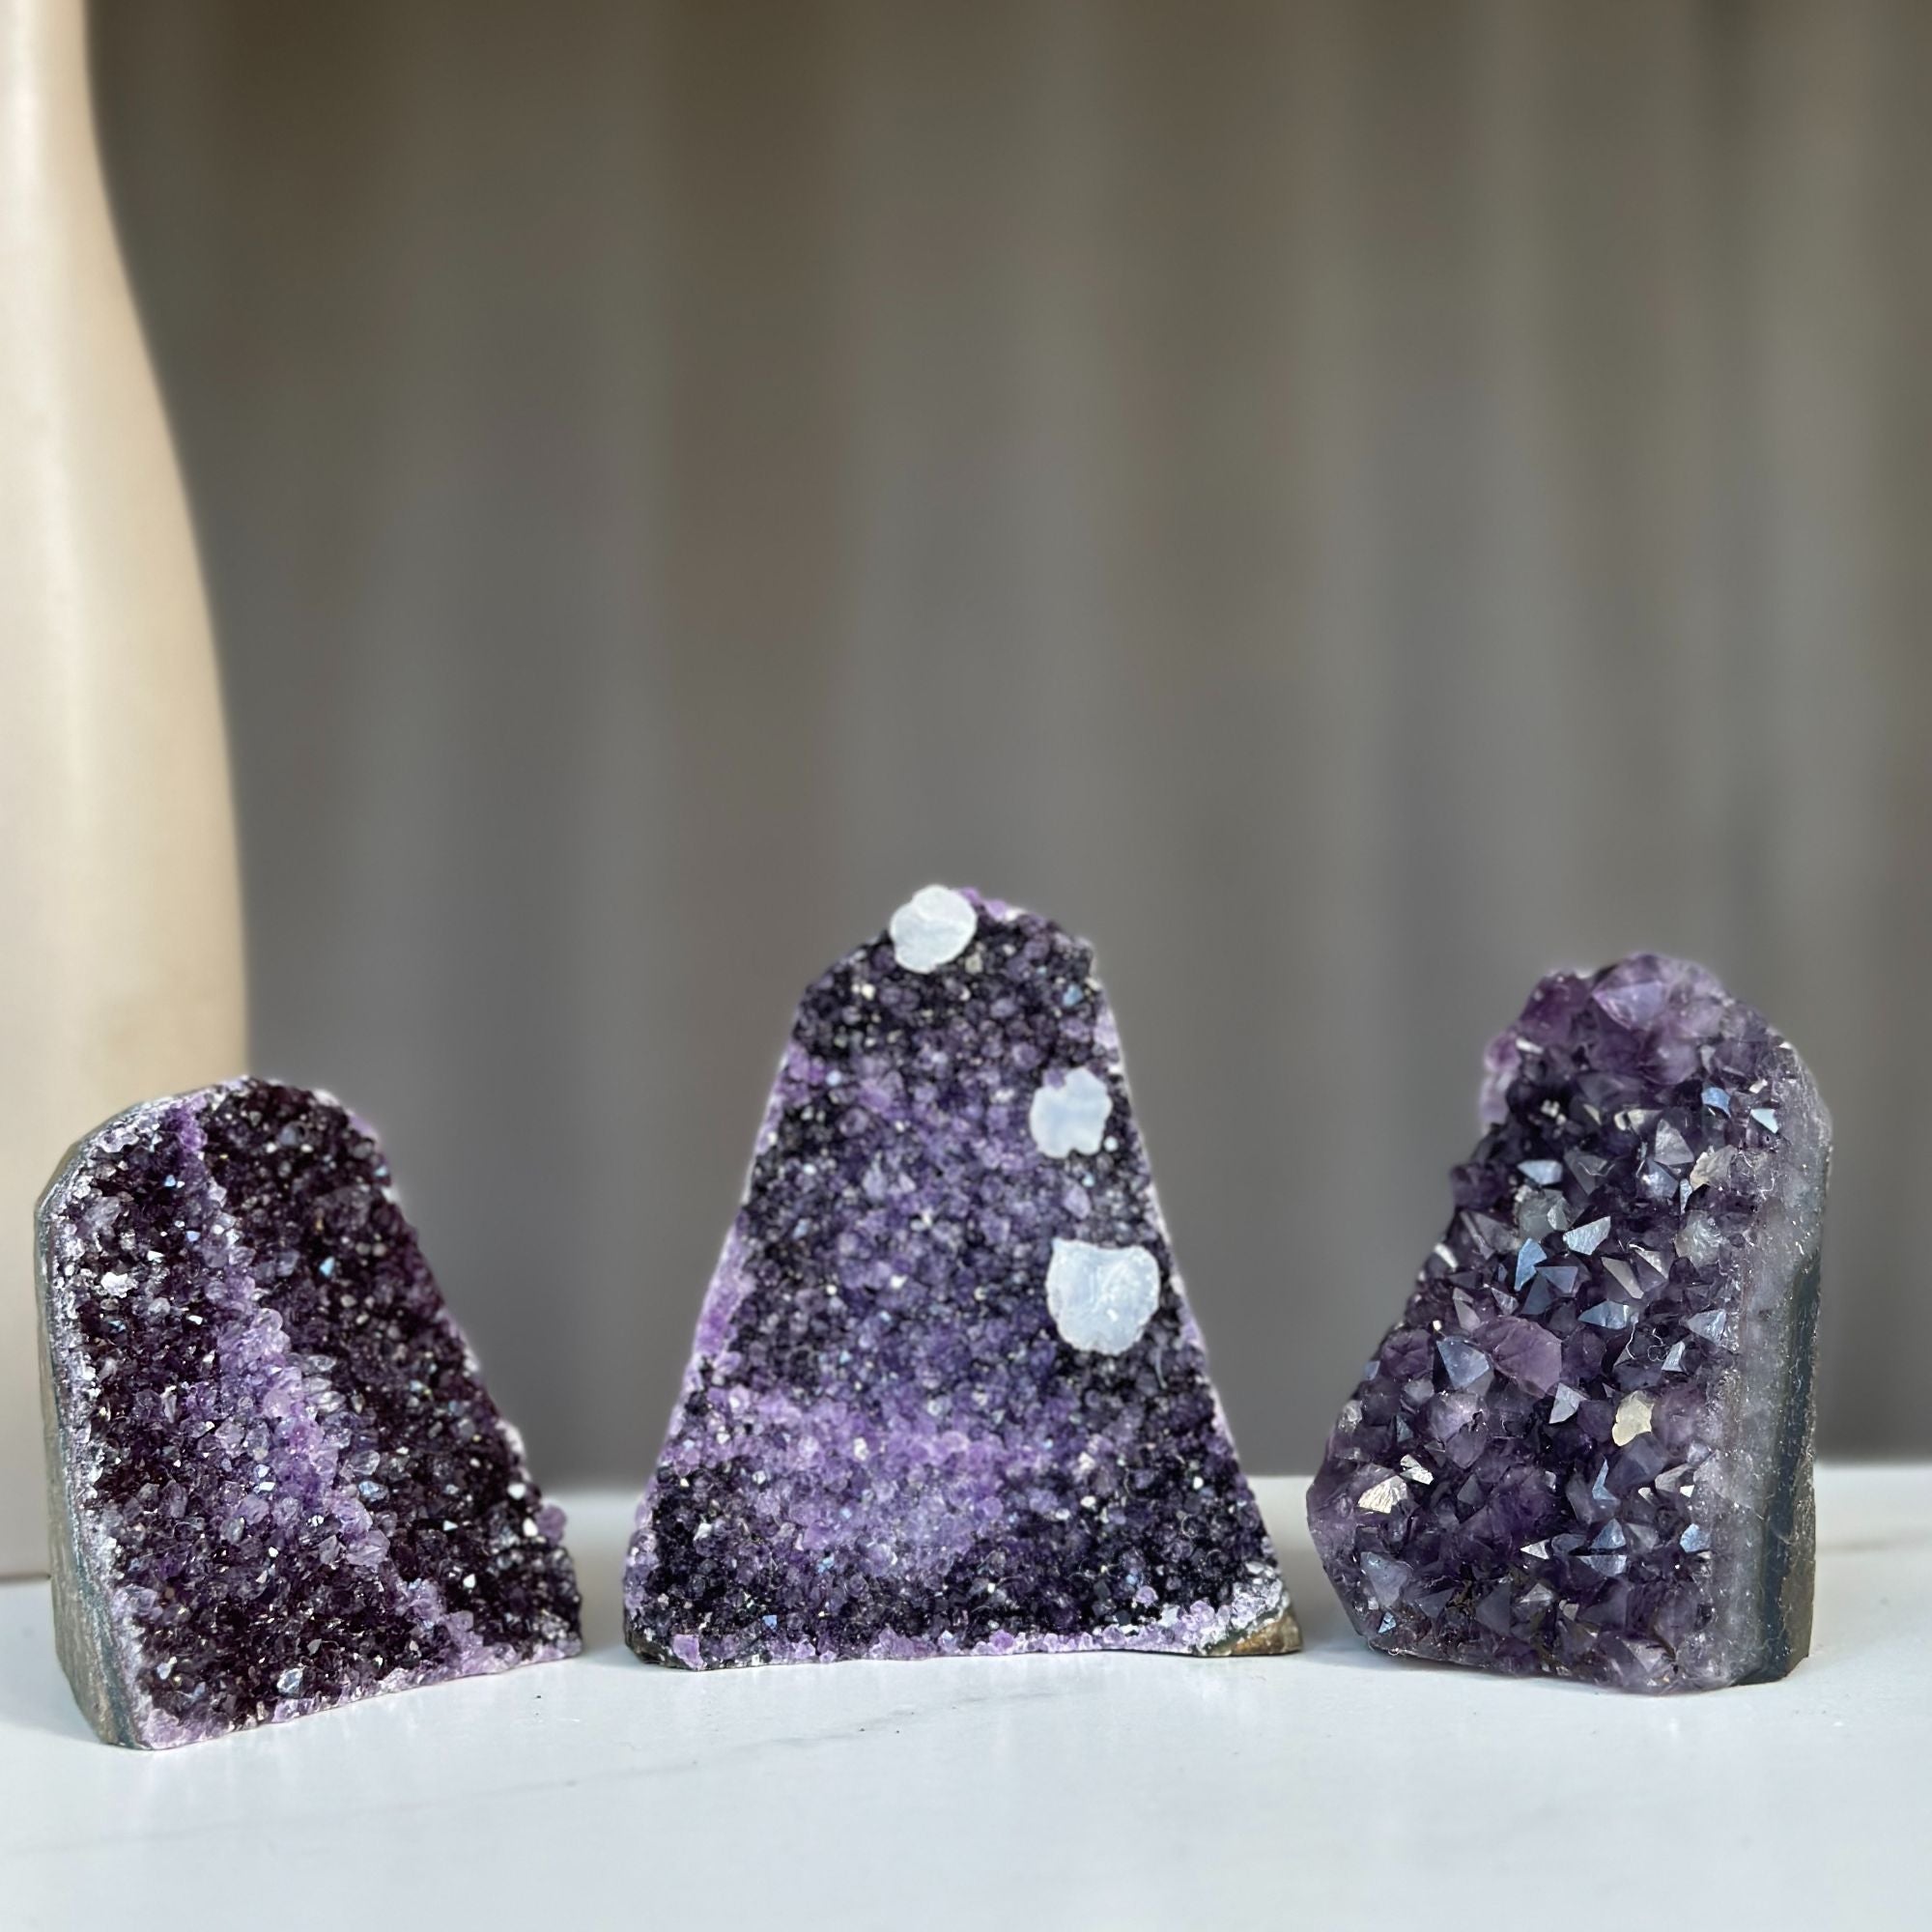 Amethyst geodes set on sale, Druzes Crystals with Cut Base, 3 pieces 3 Lbs